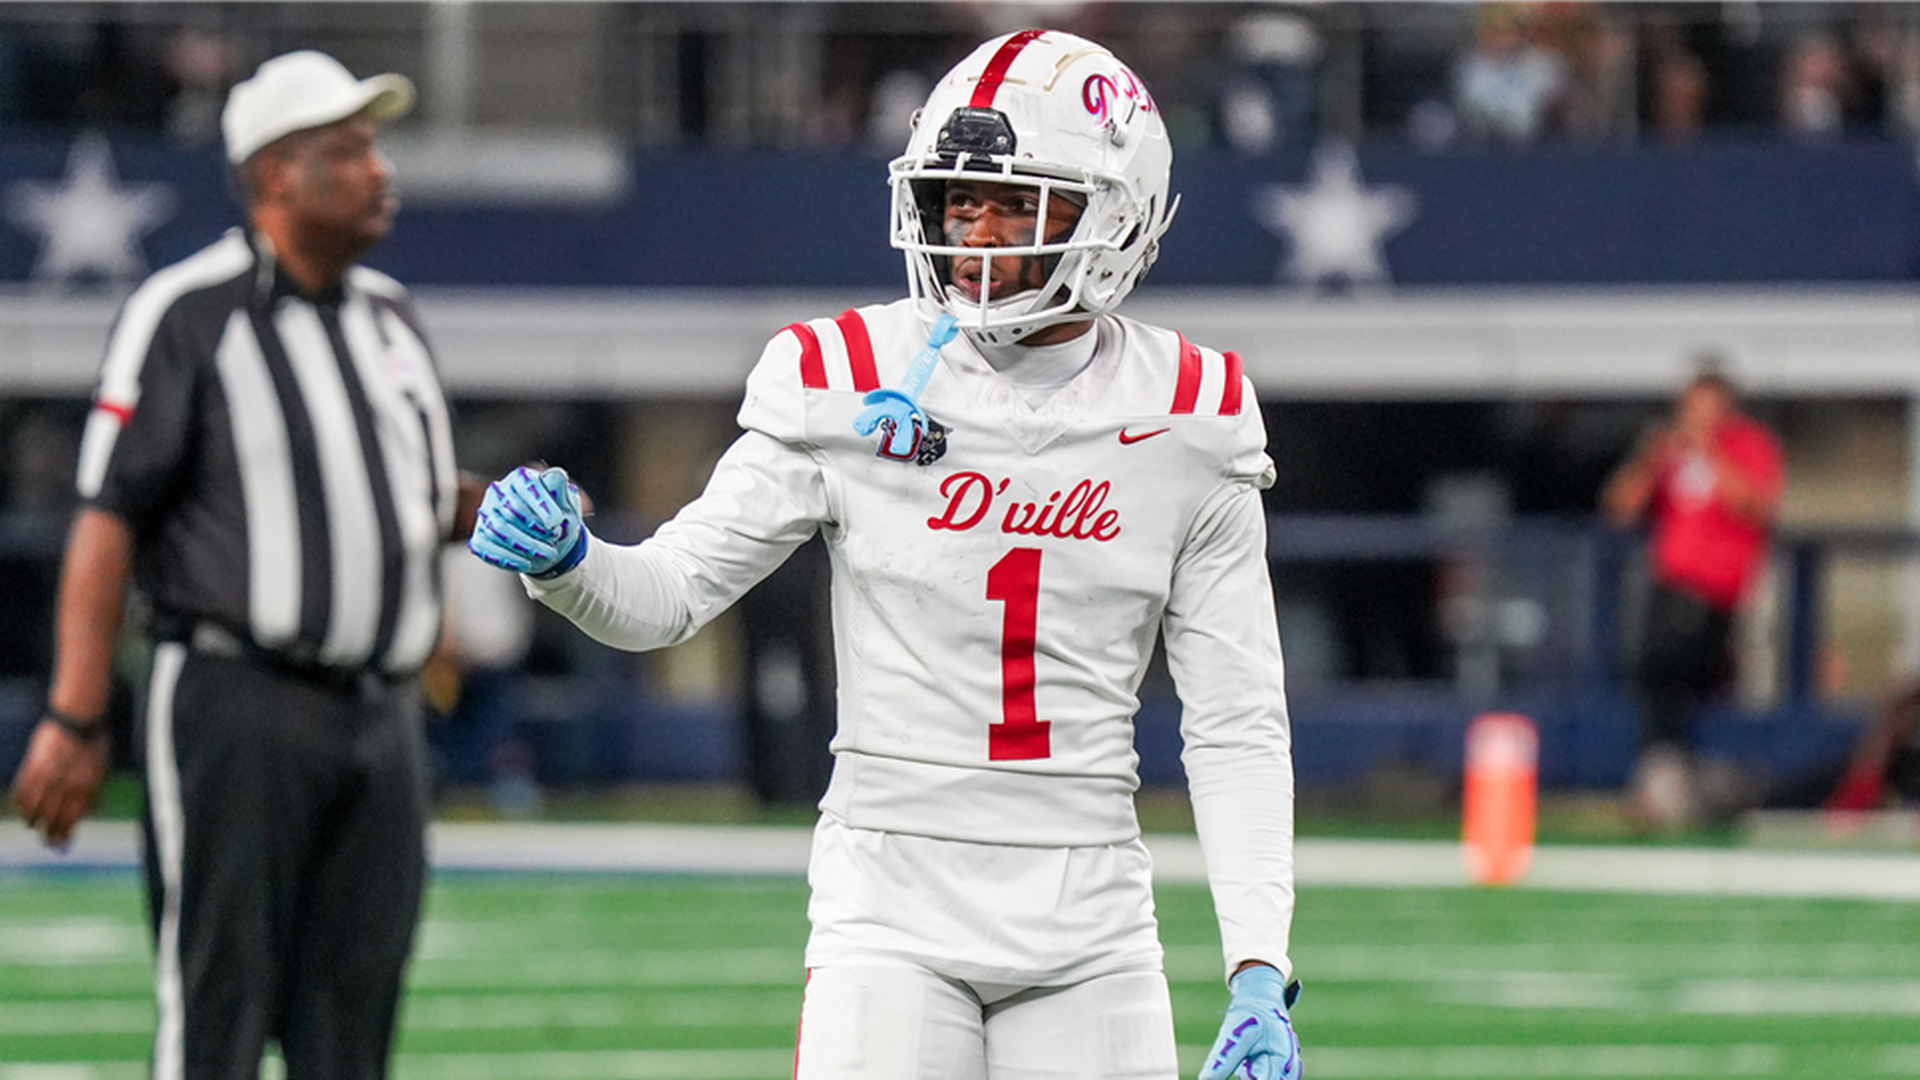 five-star wide receiver, lsu commit visits ohio state